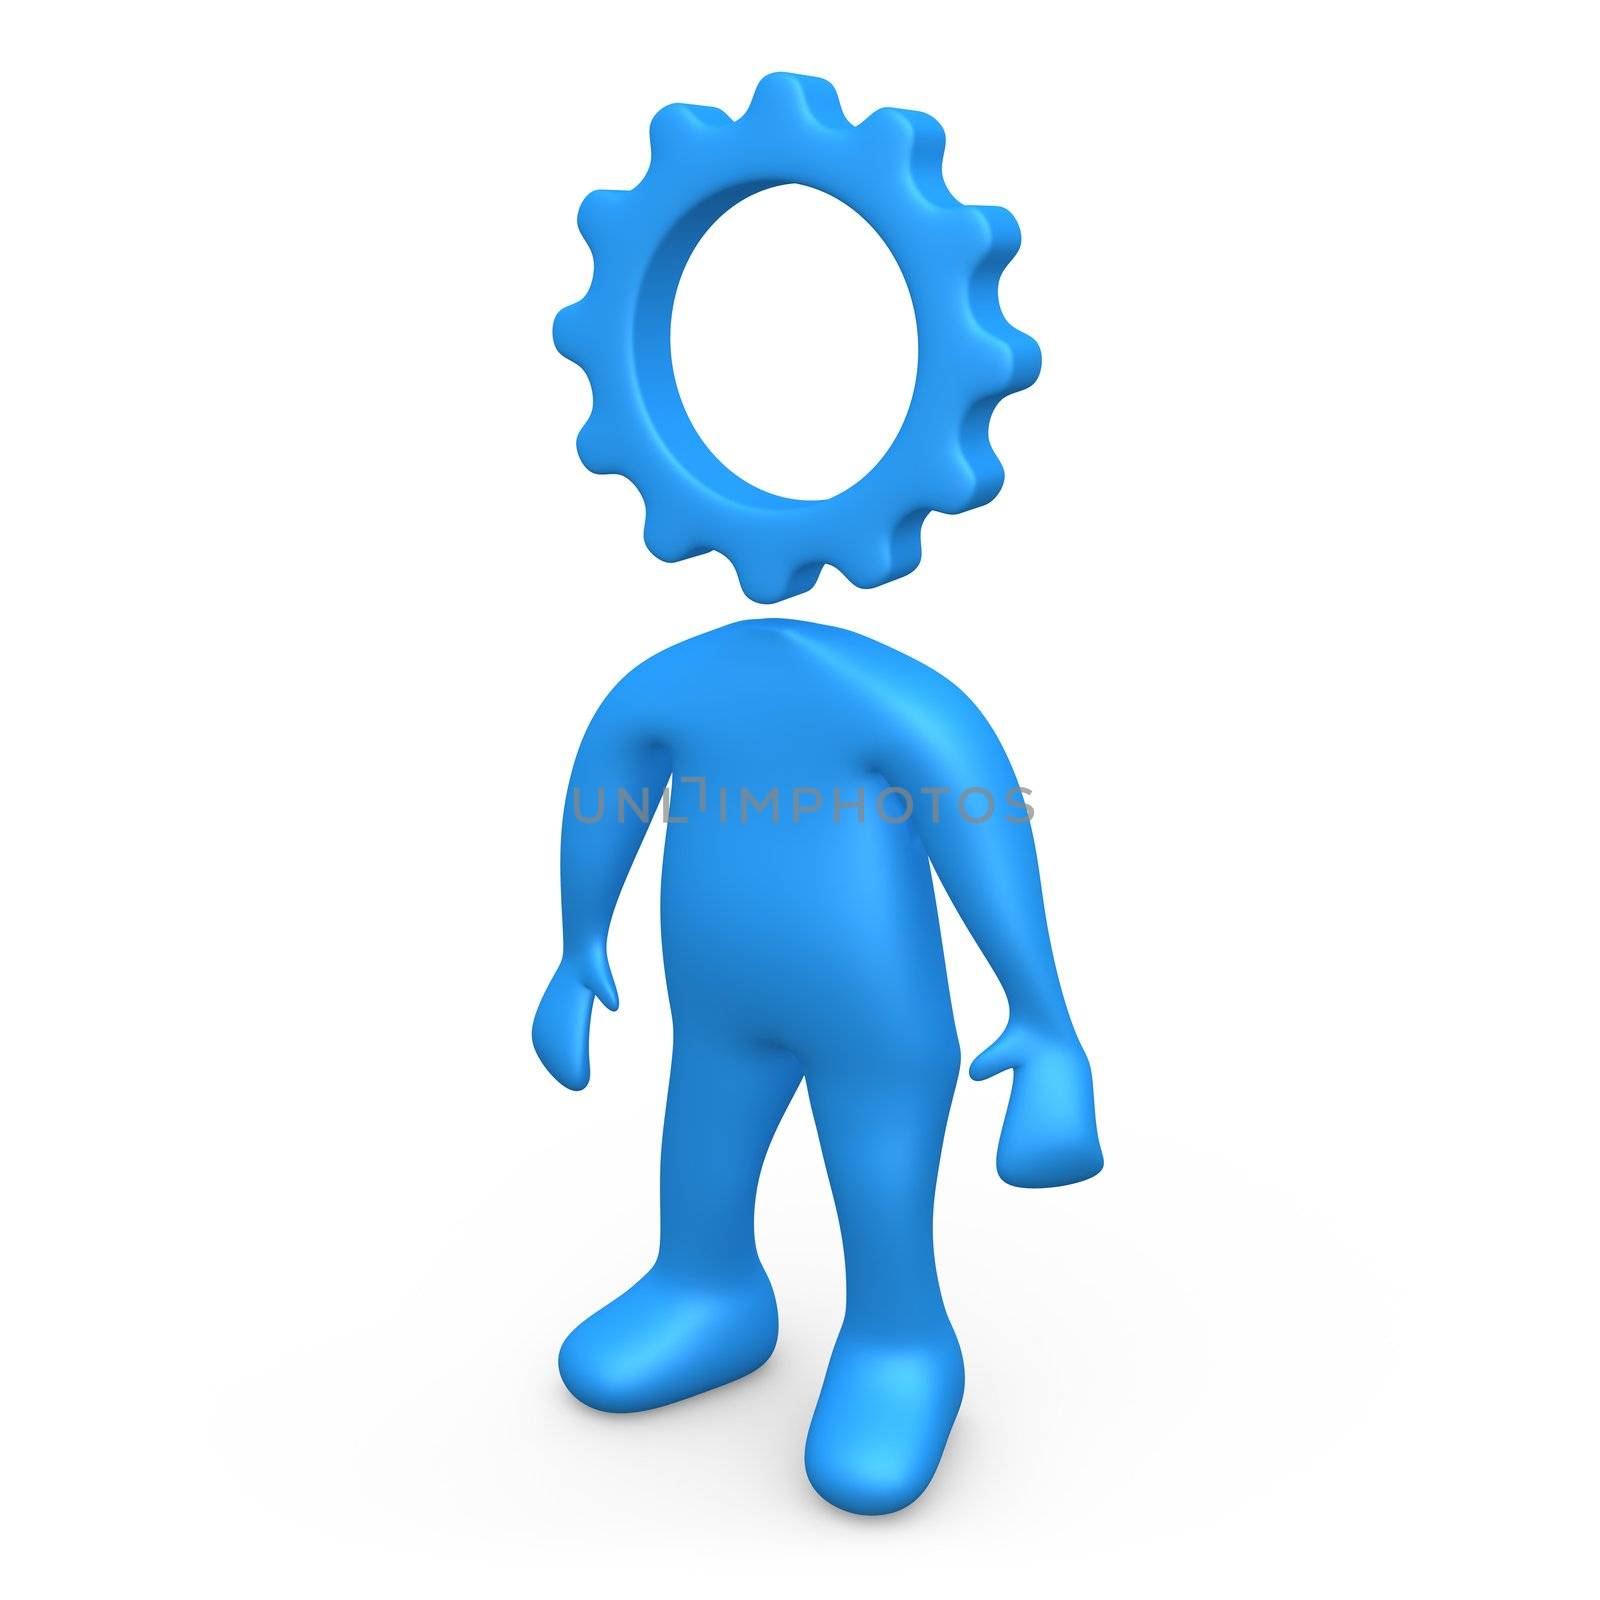 Computer generated image - Cog Person .